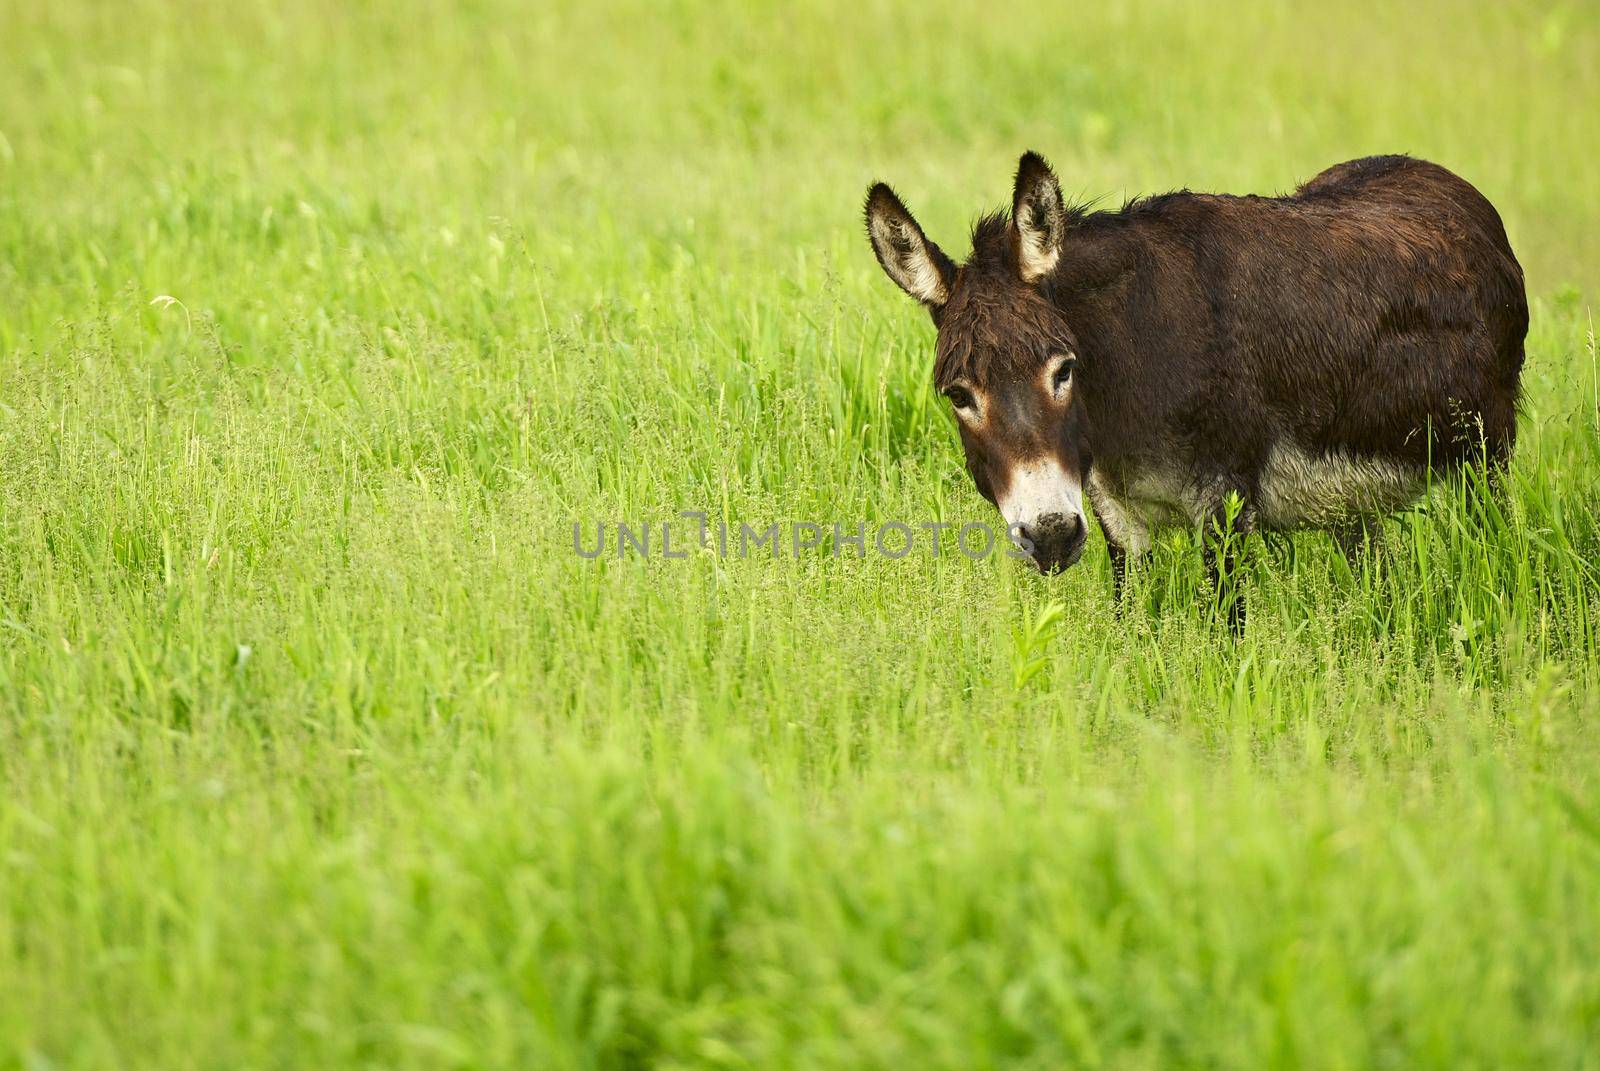 Donkey in Grass. Farm Pasture. Agriculture Photo Collection. by welcomia